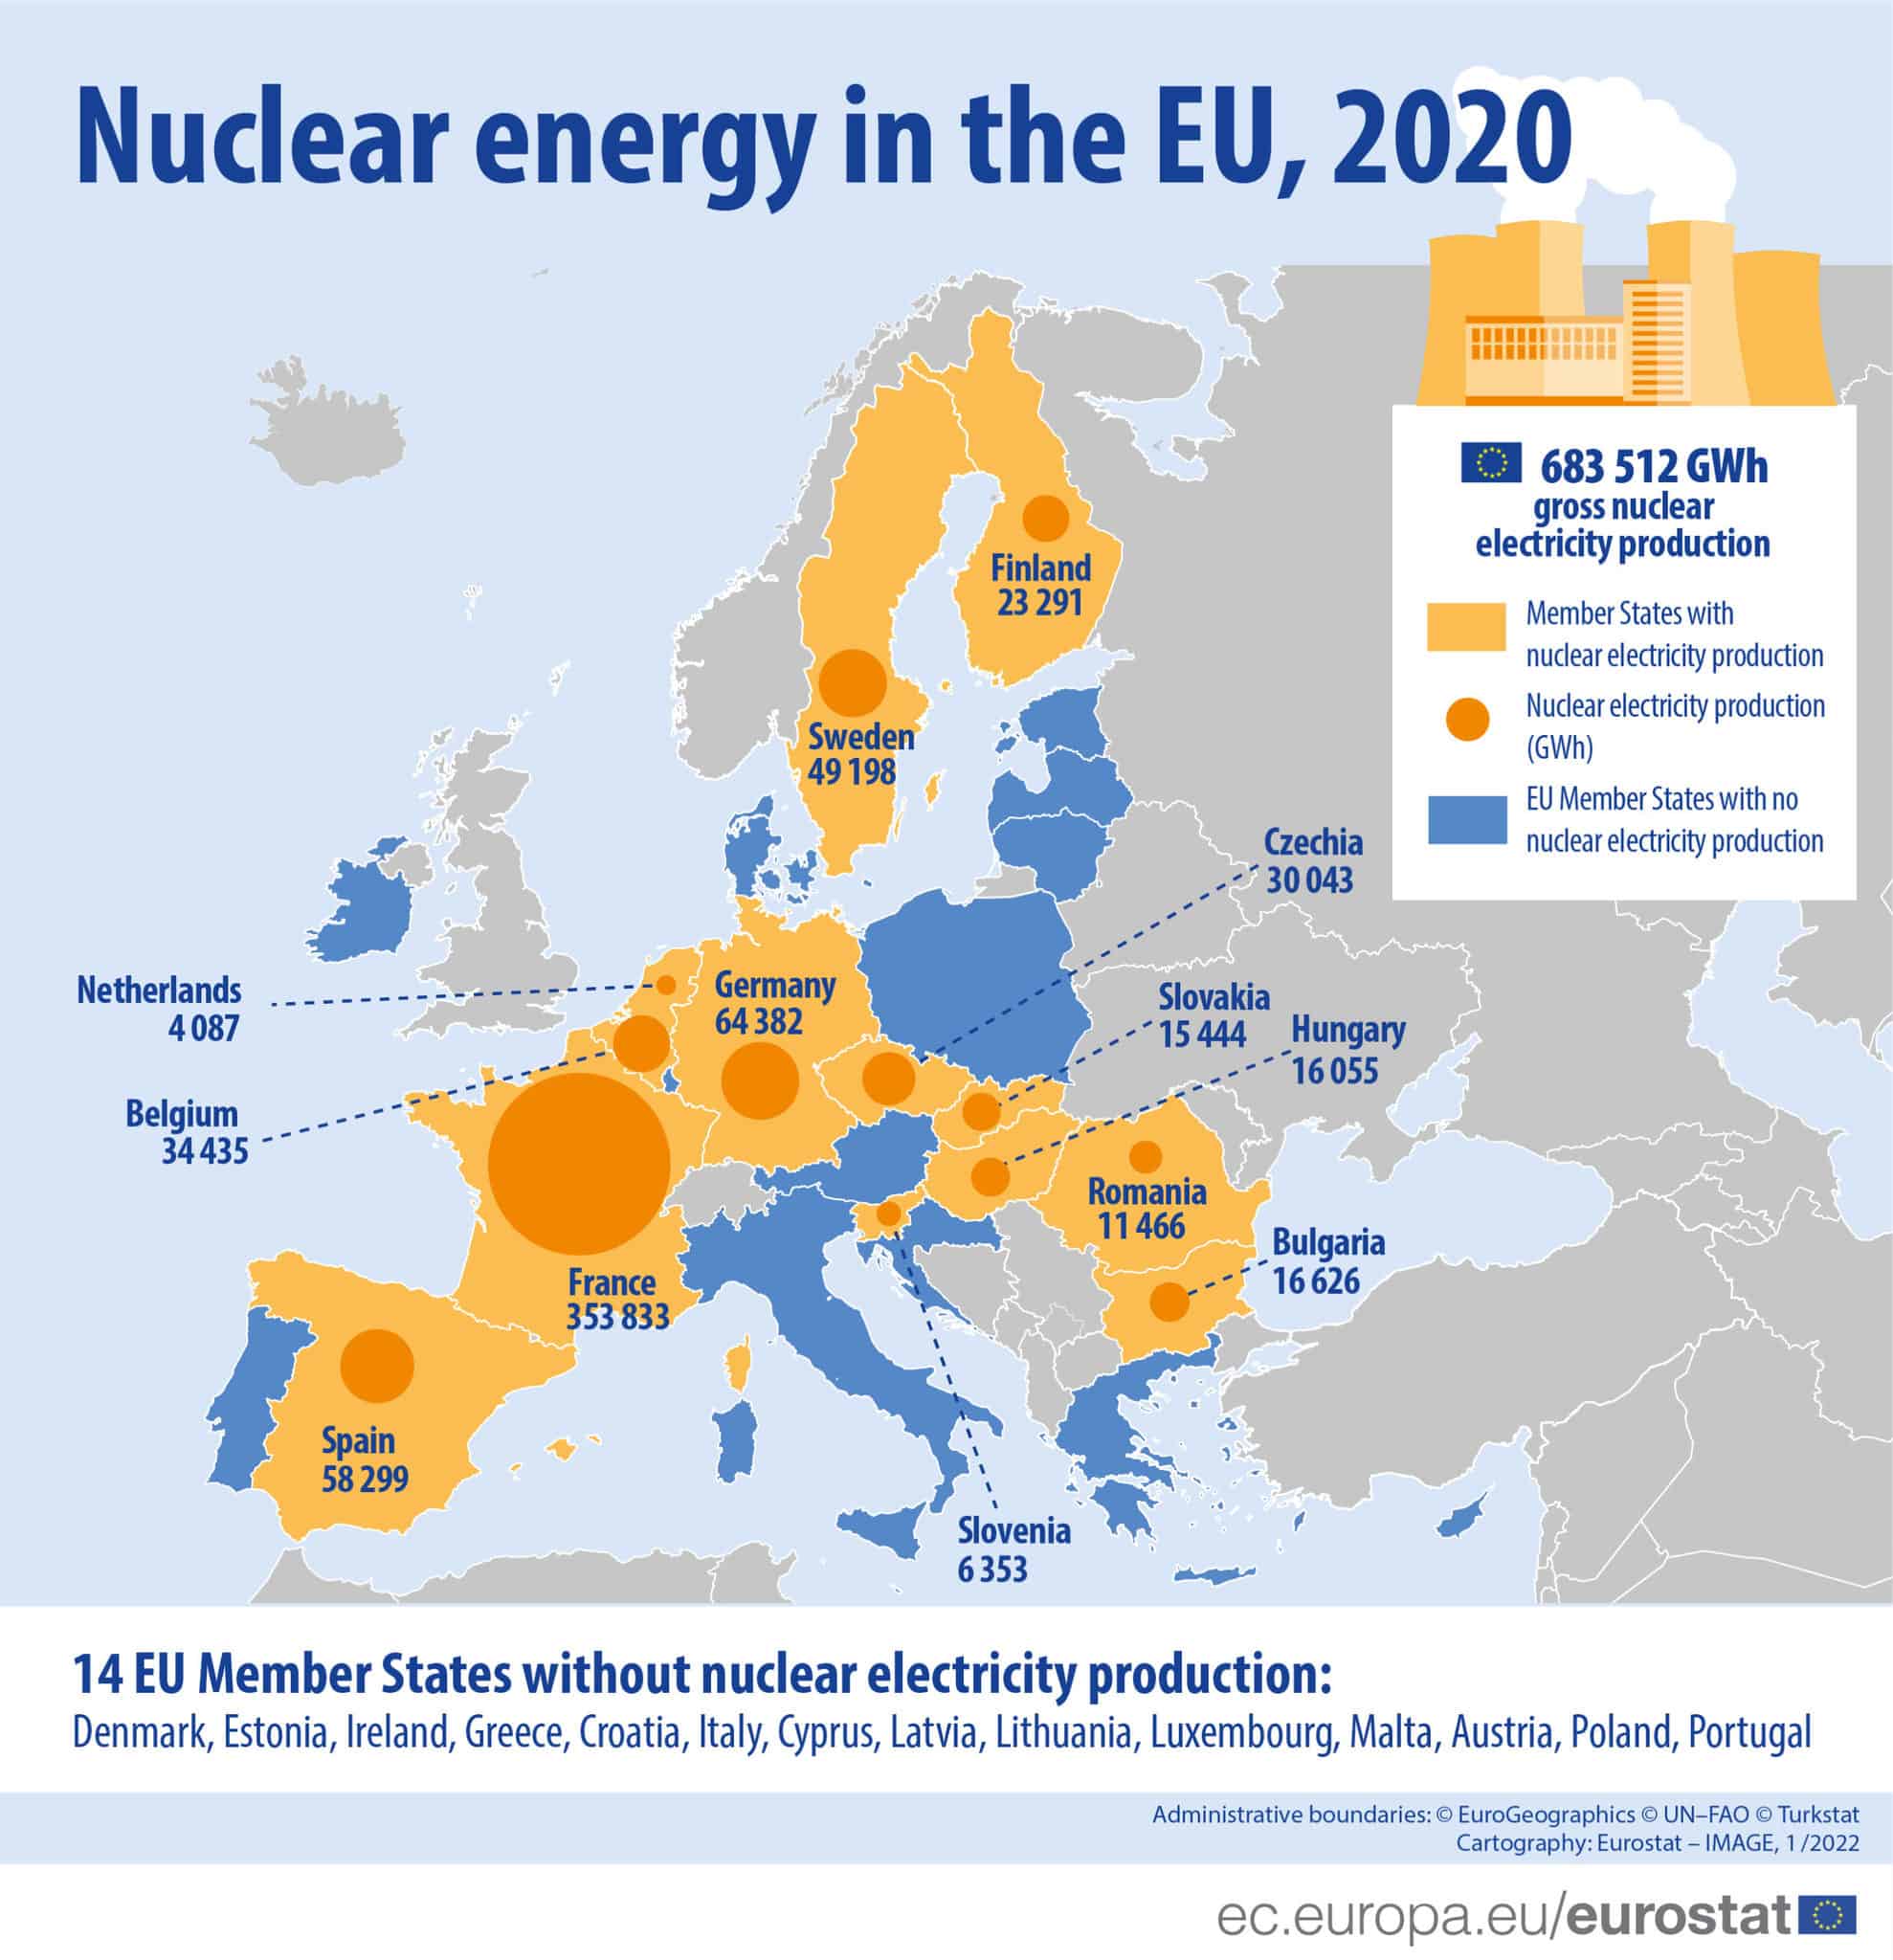 25% of EU electricity production from nuclear sources; Greece, Cyprus yet to go nuclear 2